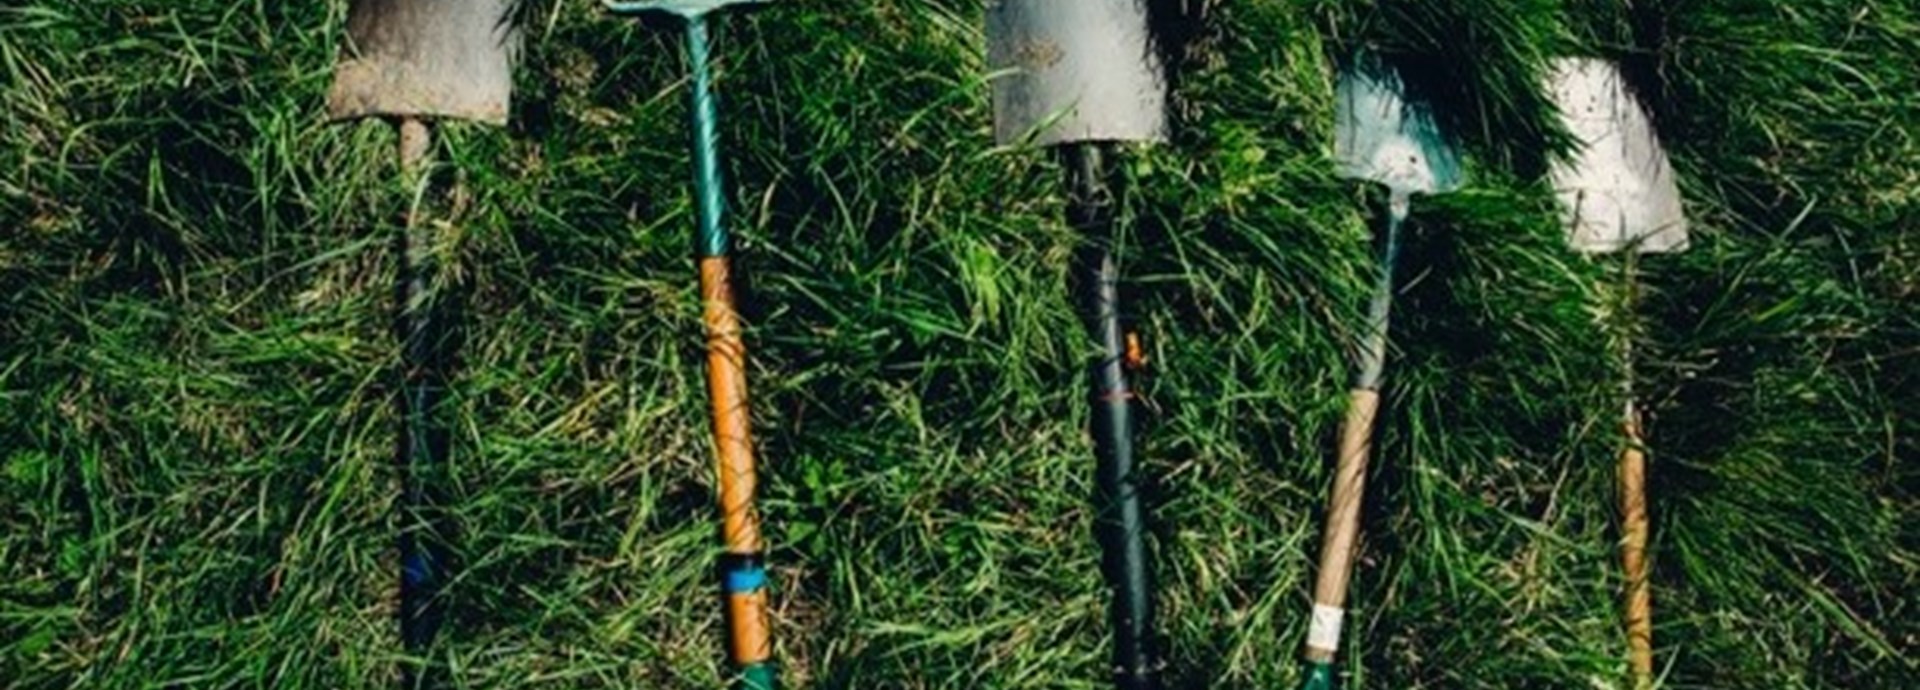 Gardening tools laid out on grass